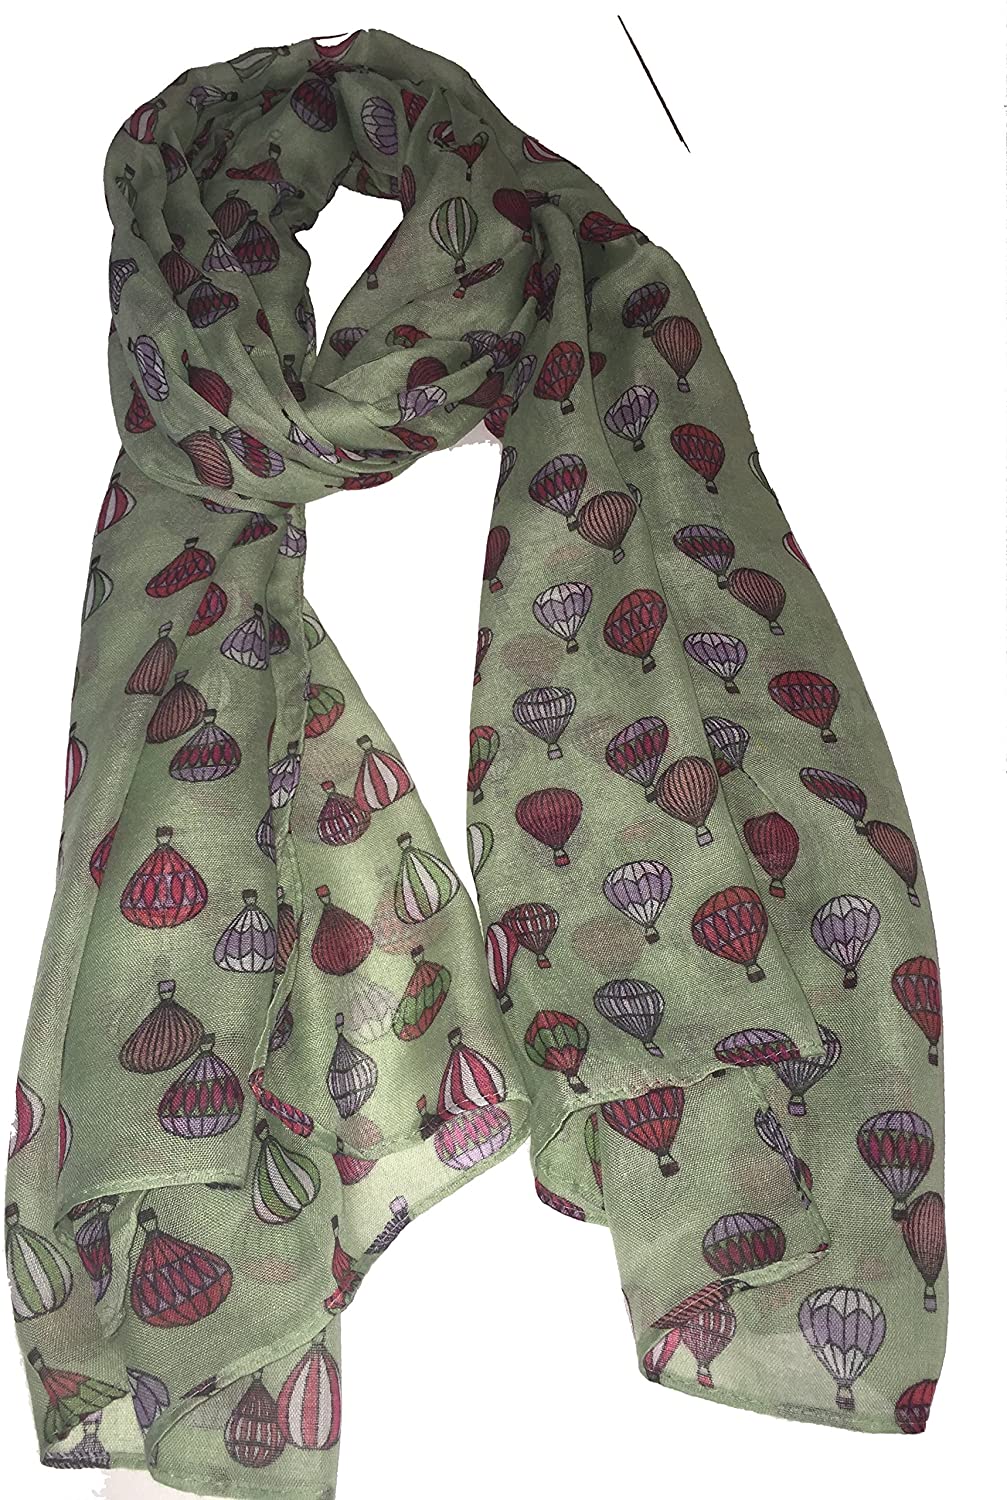 Pamper Yourself Now Light Green with Different Coloured air Balloons Scarf/wrap